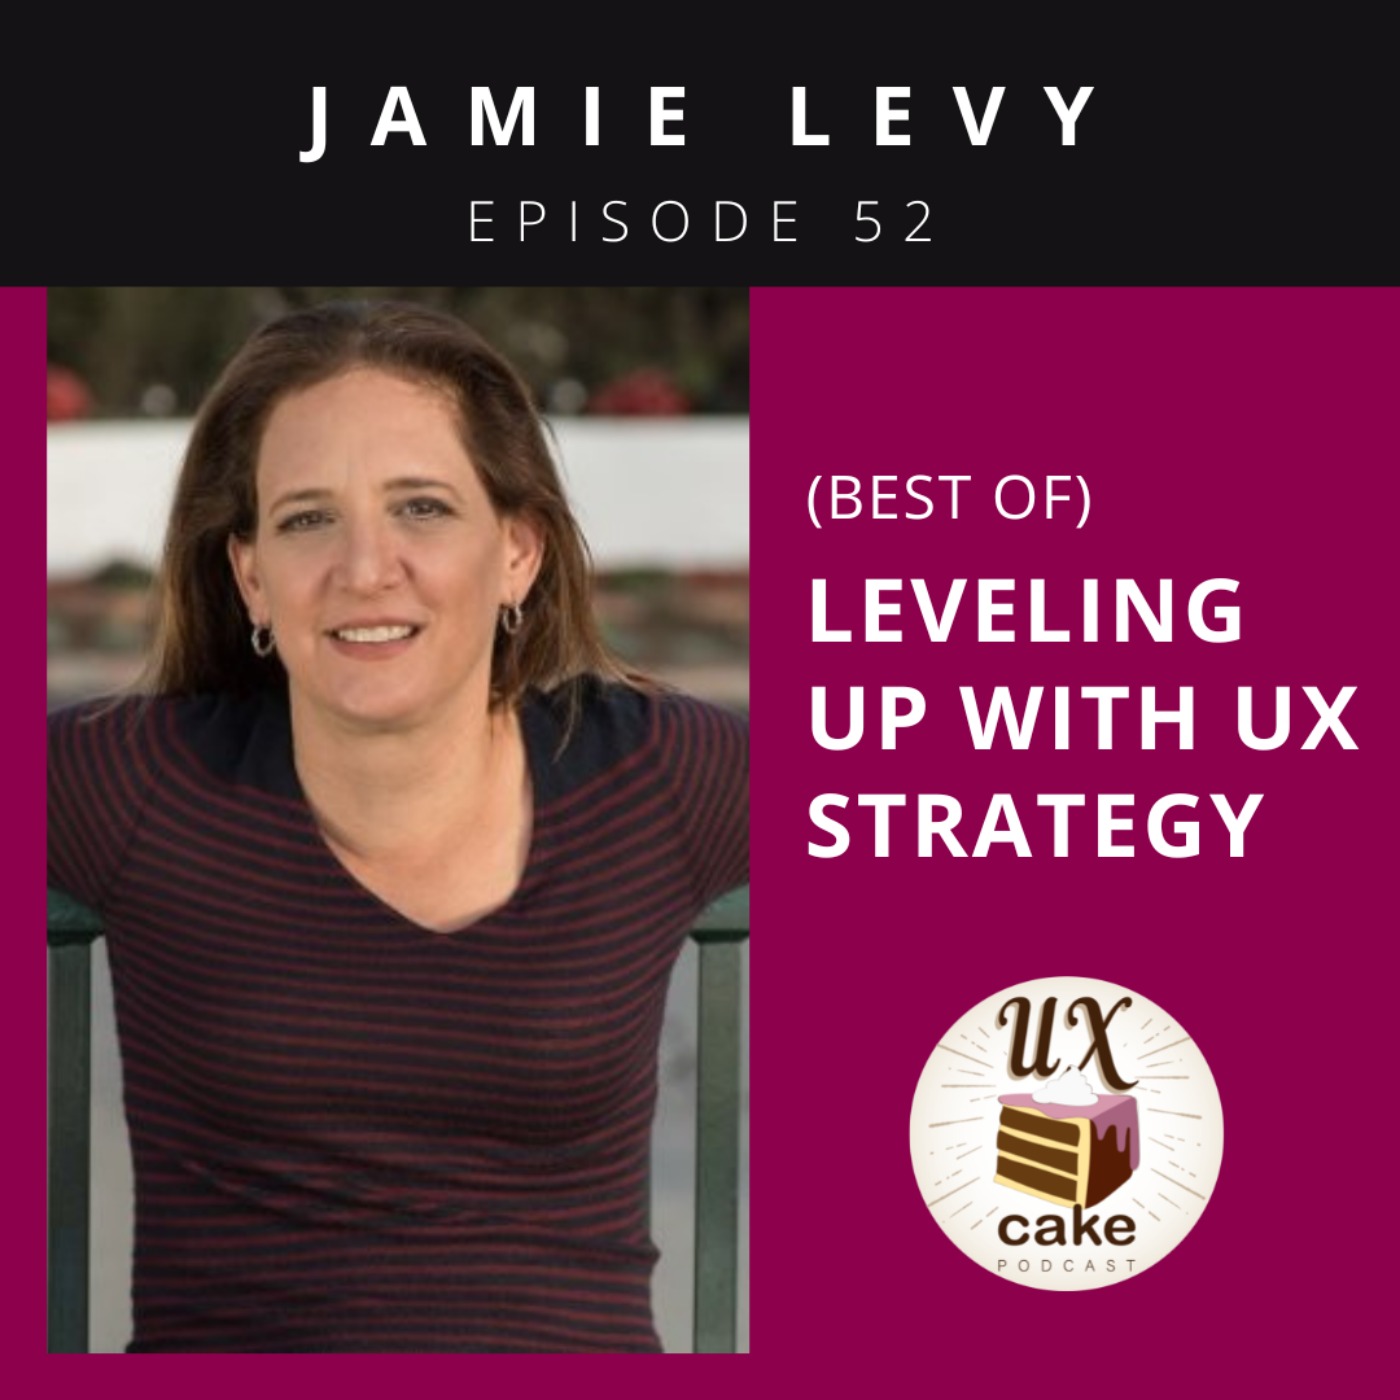 (Best of) Leveling up with UX Strategy